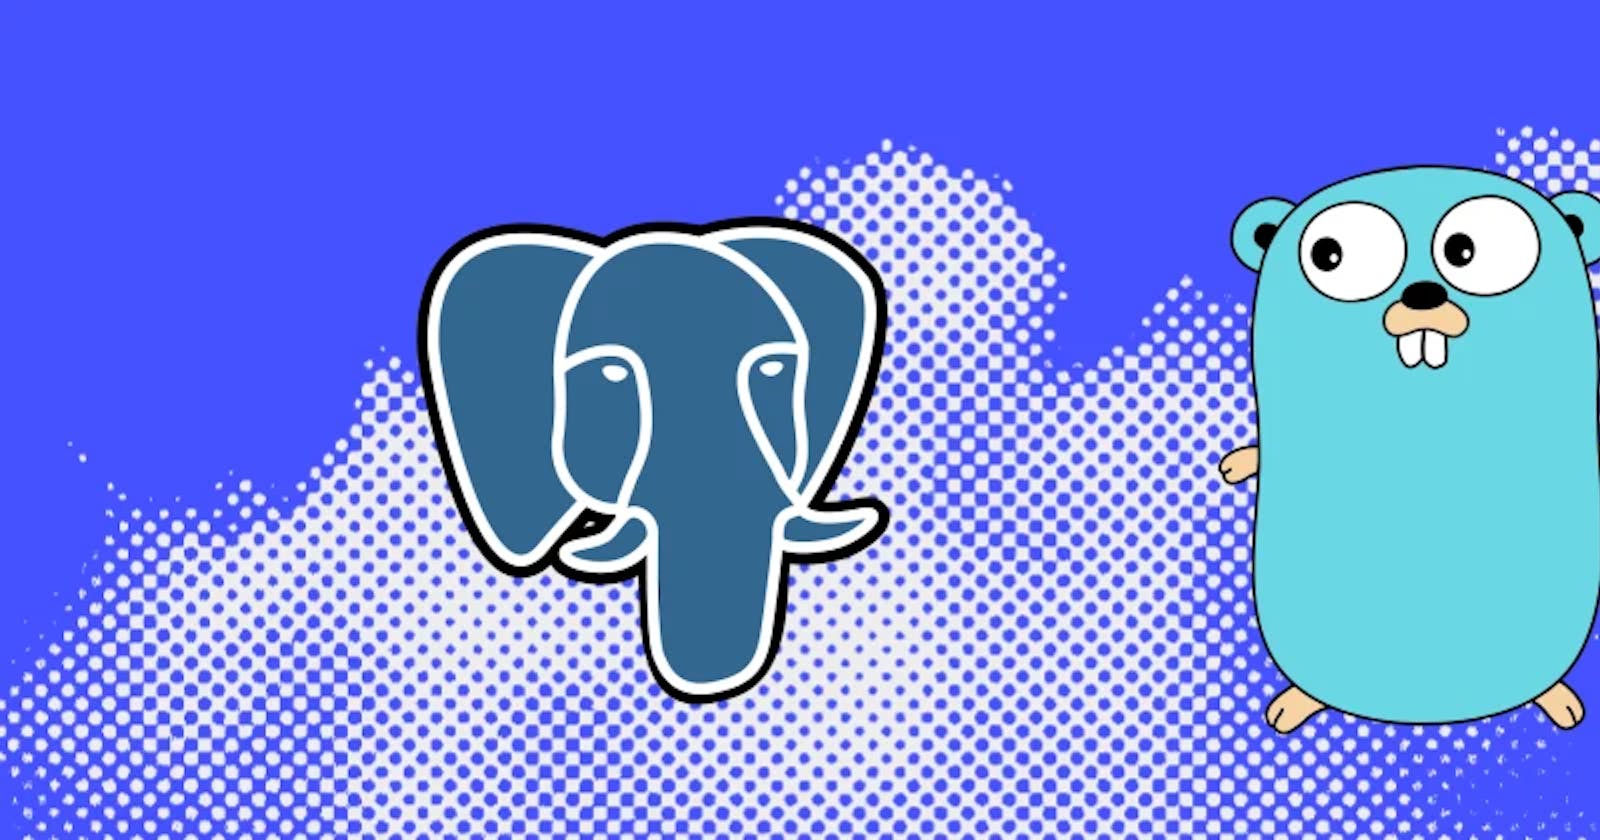 Building a cloud backend in Go using REST and PostgreSQL